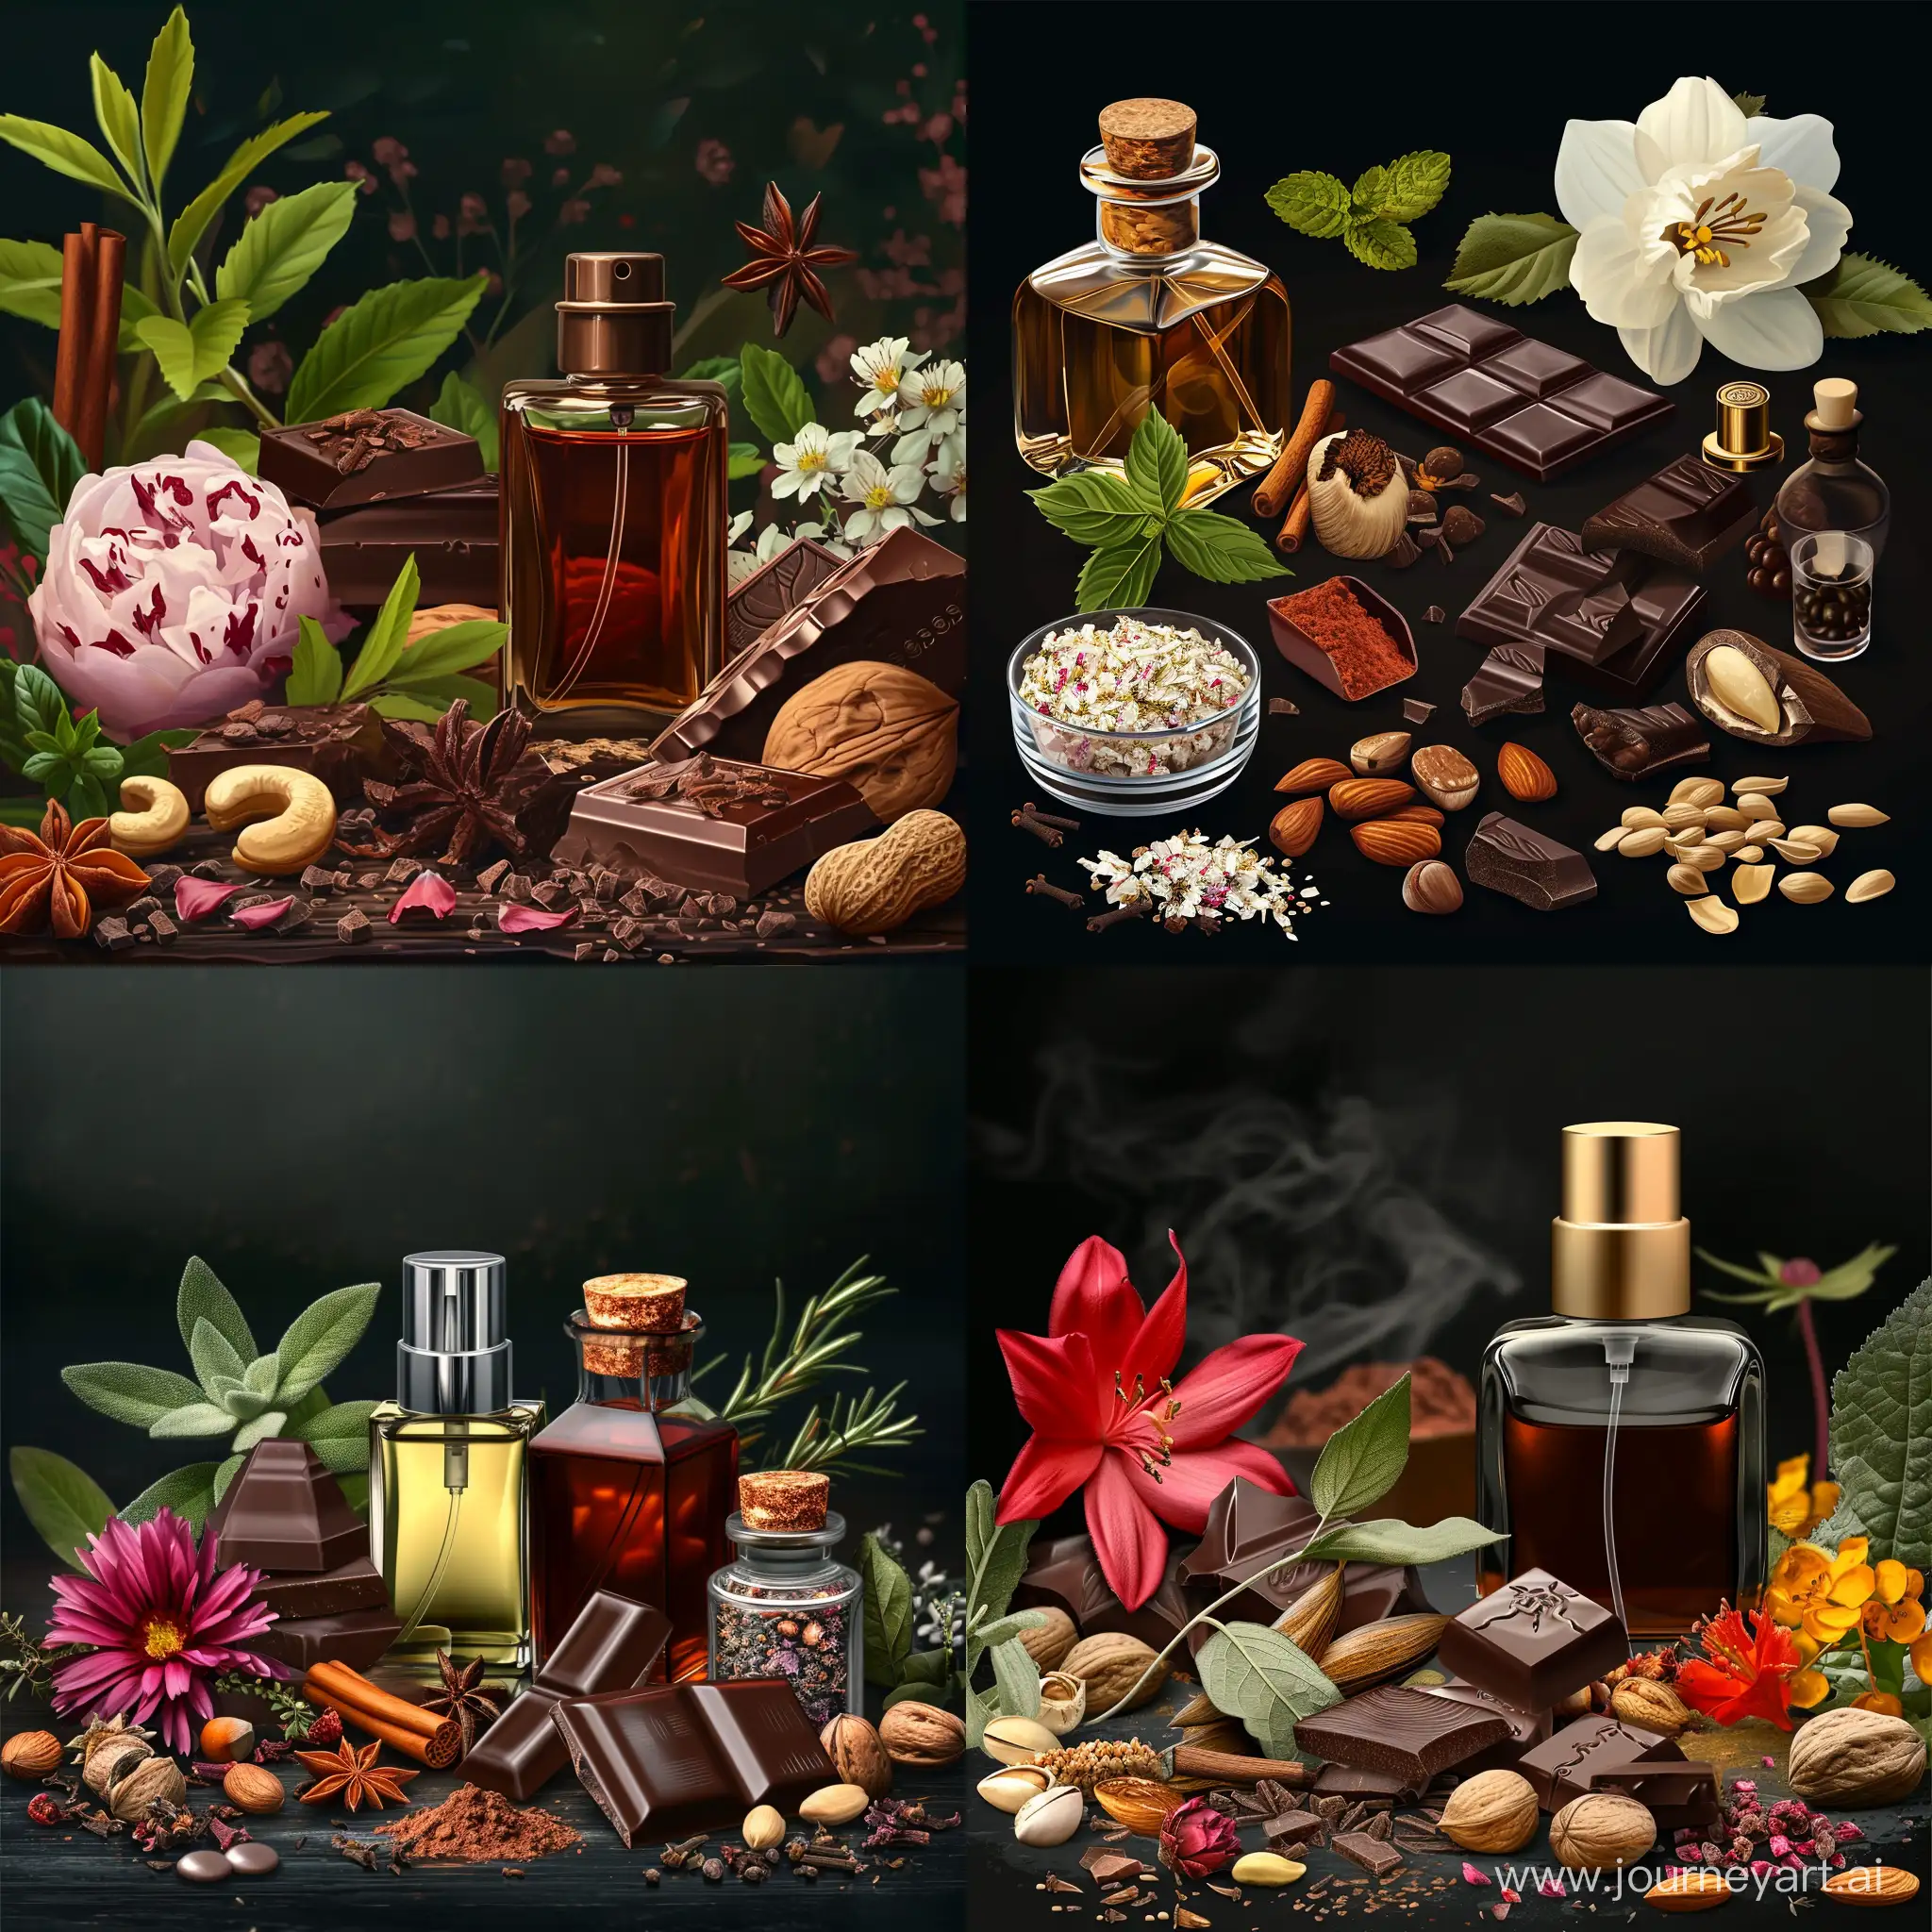 Exquisite-Perfumes-and-Medicinal-Herbs-in-a-Mysterious-Atmosphere